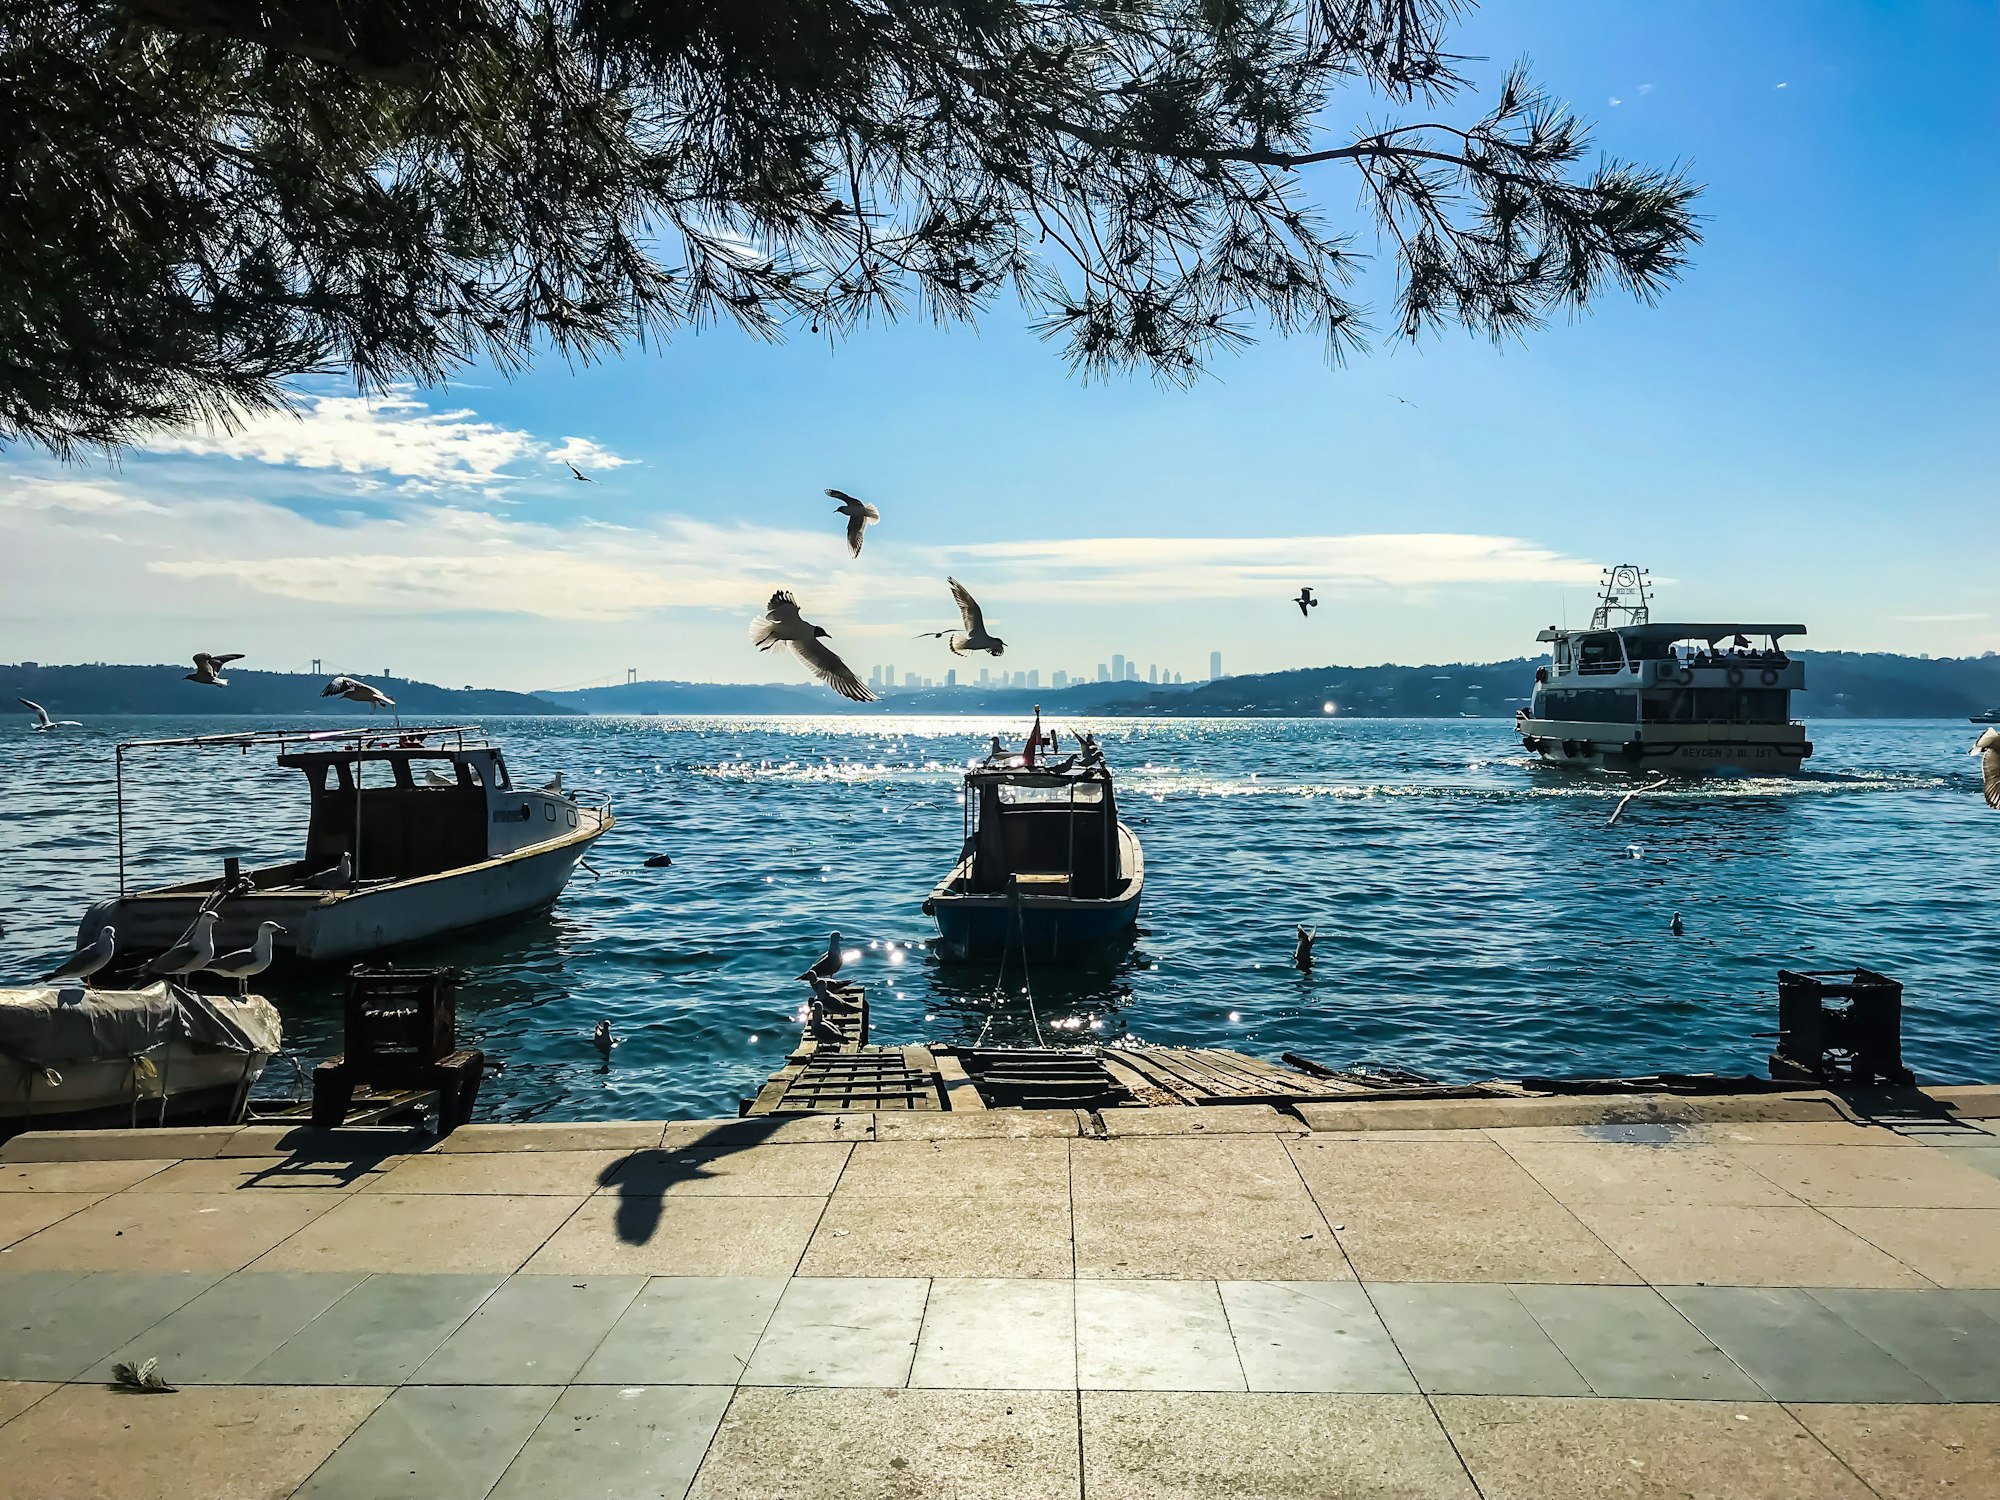 Ikamet — Turkey pomade beachfront route with fishing boats and seagulls soaring overhead